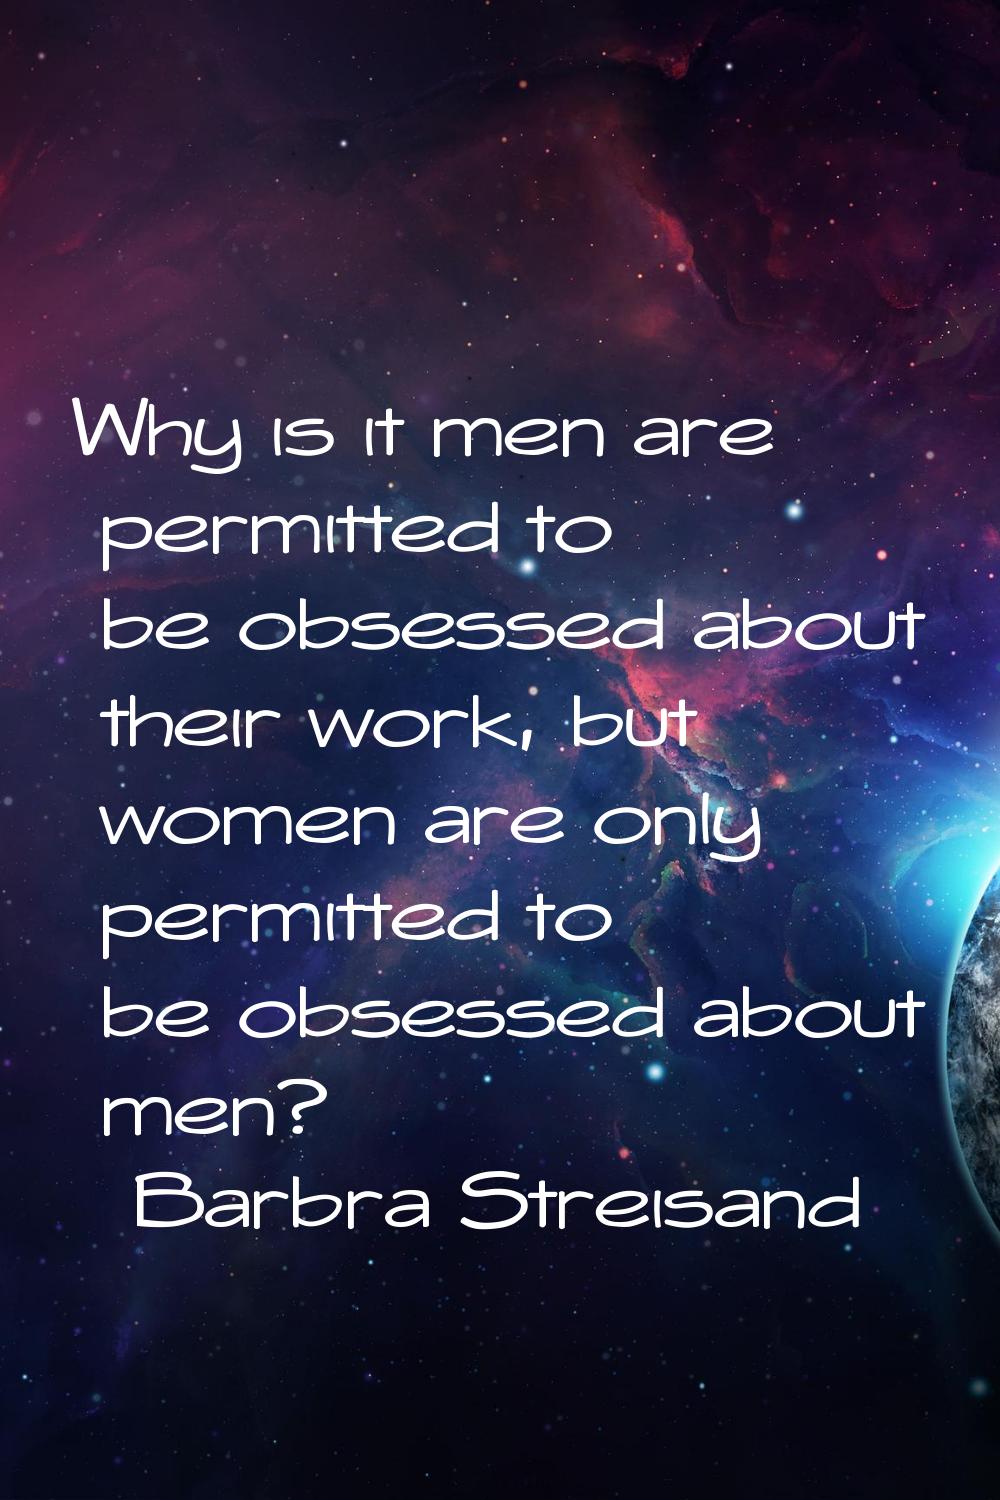 Why is it men are permitted to be obsessed about their work, but women are only permitted to be obs